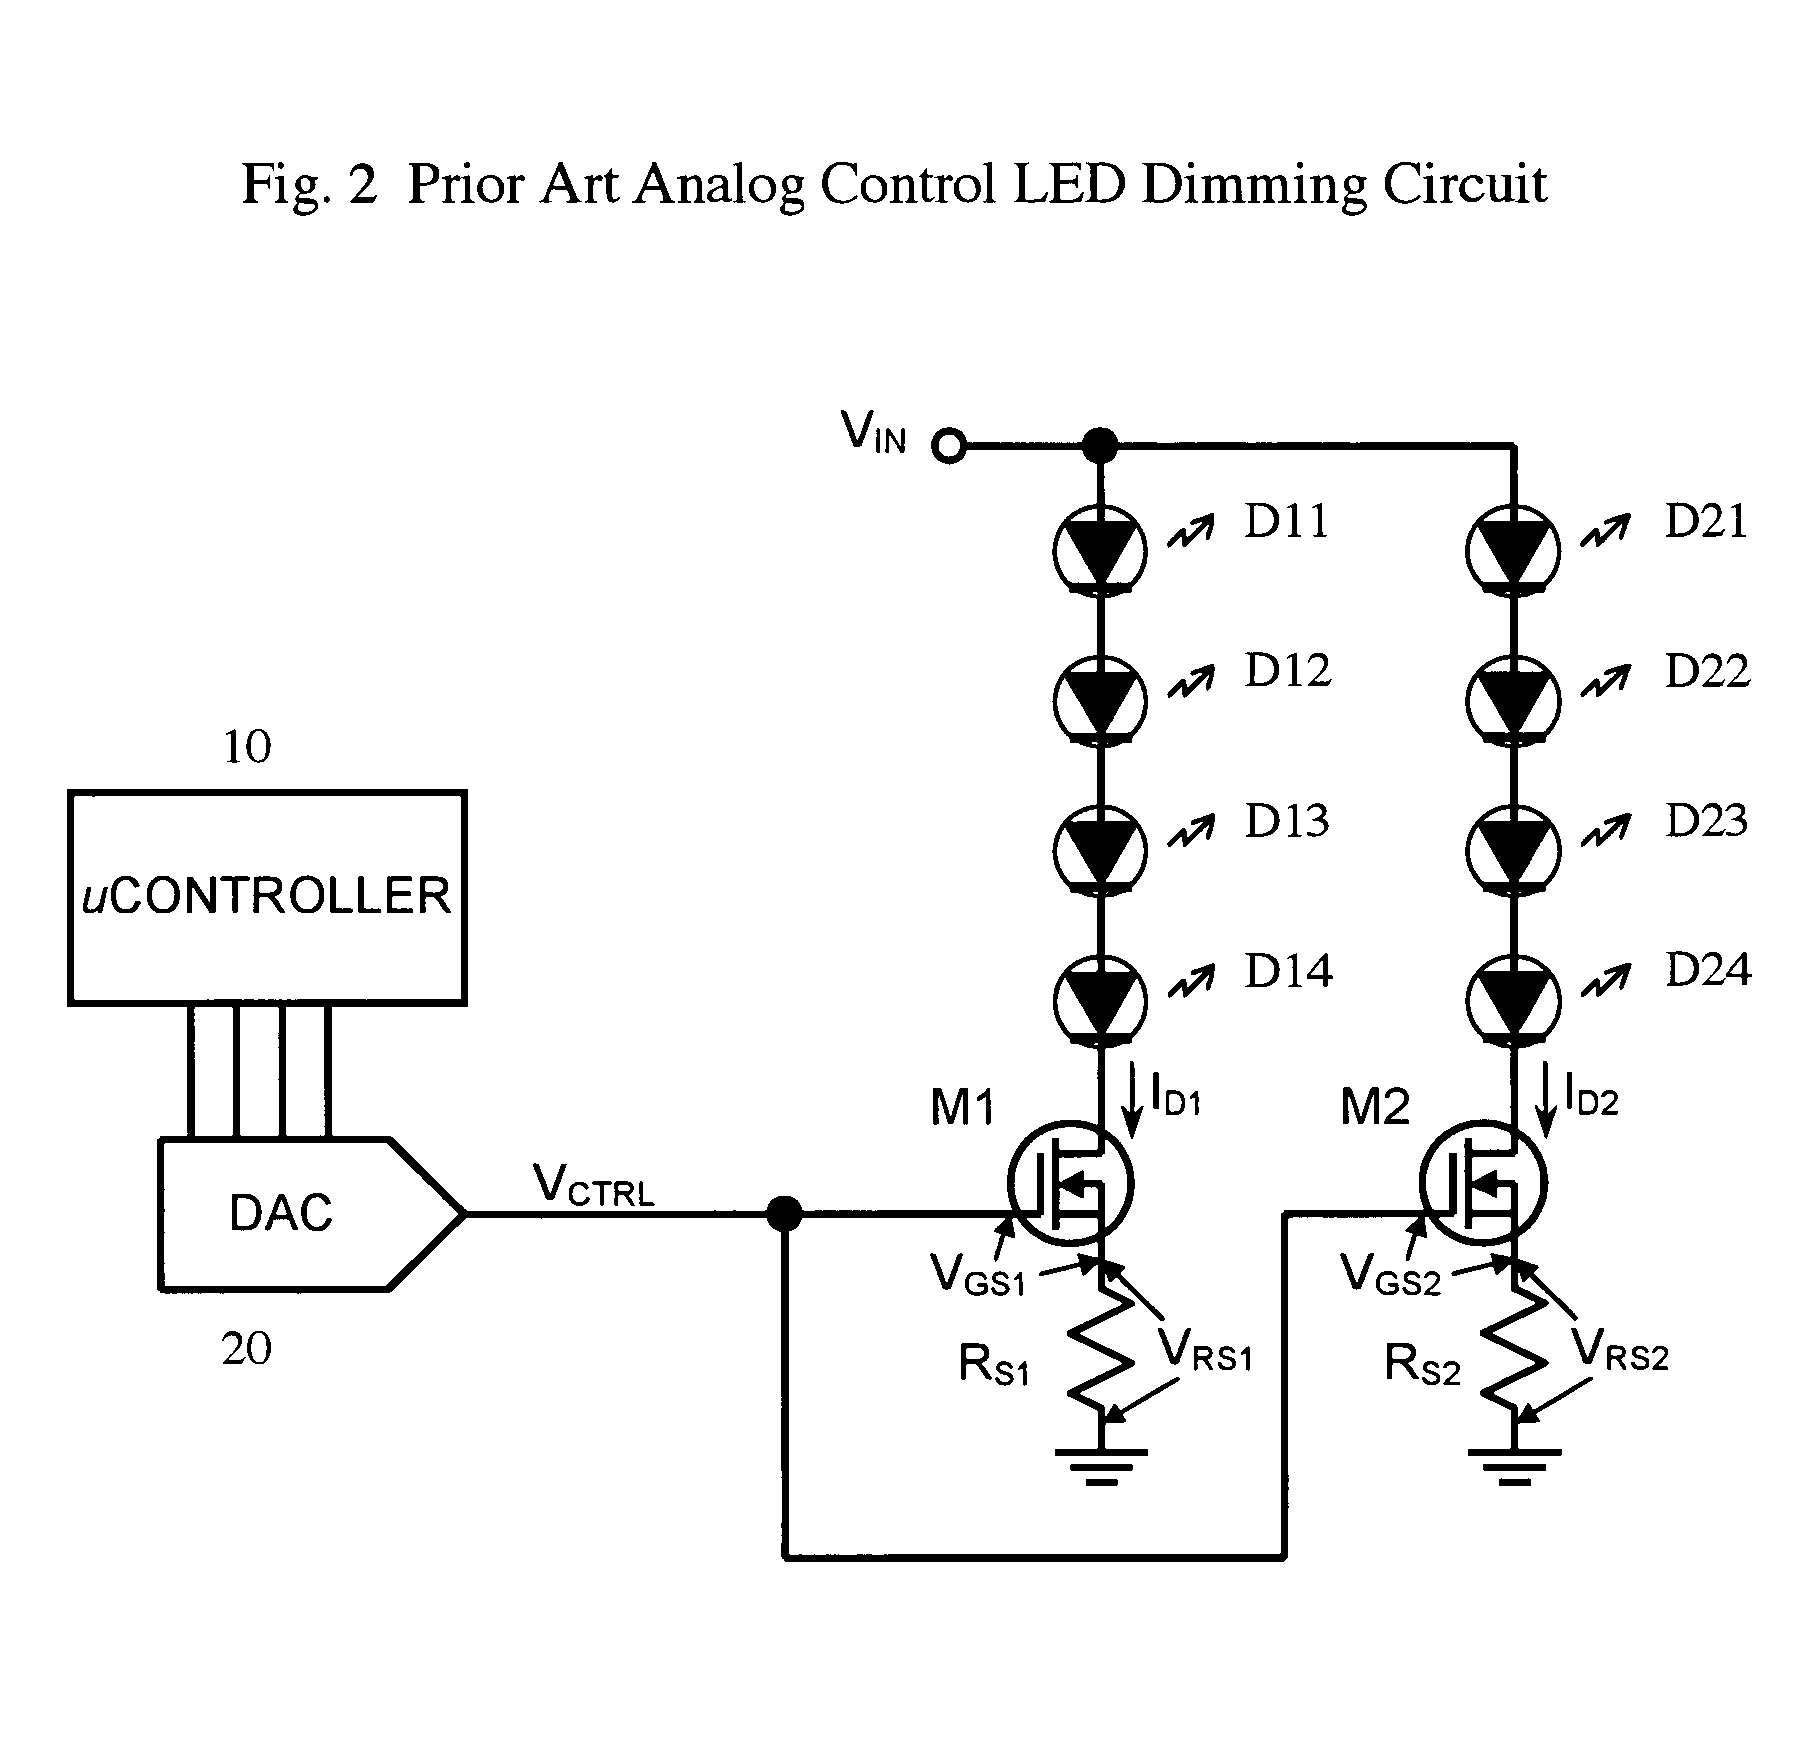 Modulated control circuit and method for current-limited dimming and color mixing of display and illumination systems